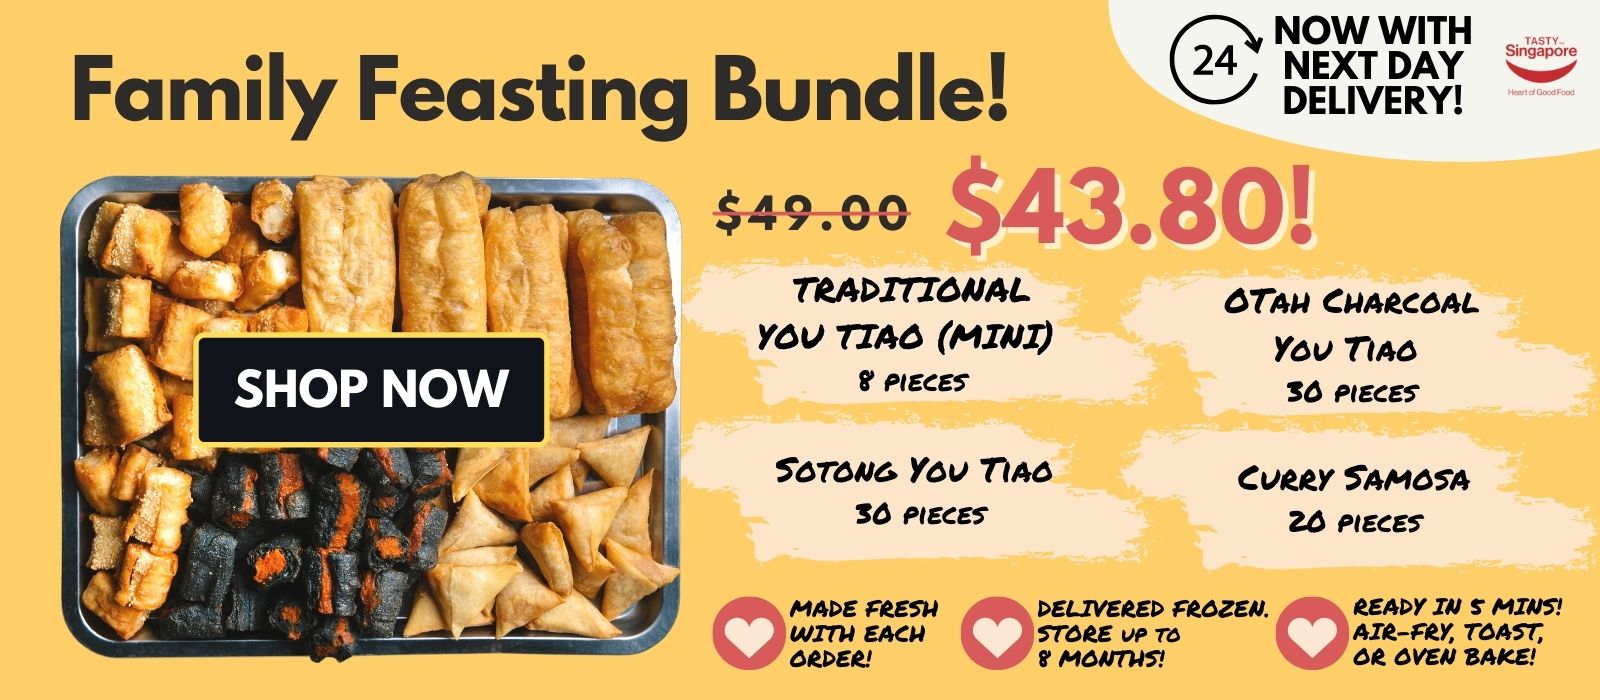 Fried Family Feasting Bundle, used to be $49.00 now available at $43.80 with next day delivery. It consists of 8 pieces of Traditional youtiao (mini), 30 pieces of Otah charcoal youtiao, 30 pieces Sotong Youtiao and 20 pieces Curry samosa. Delivered Frozen and can be stored up to 8 months. Ready in 5 mins, can be air-fried, toasted or oven baked. 